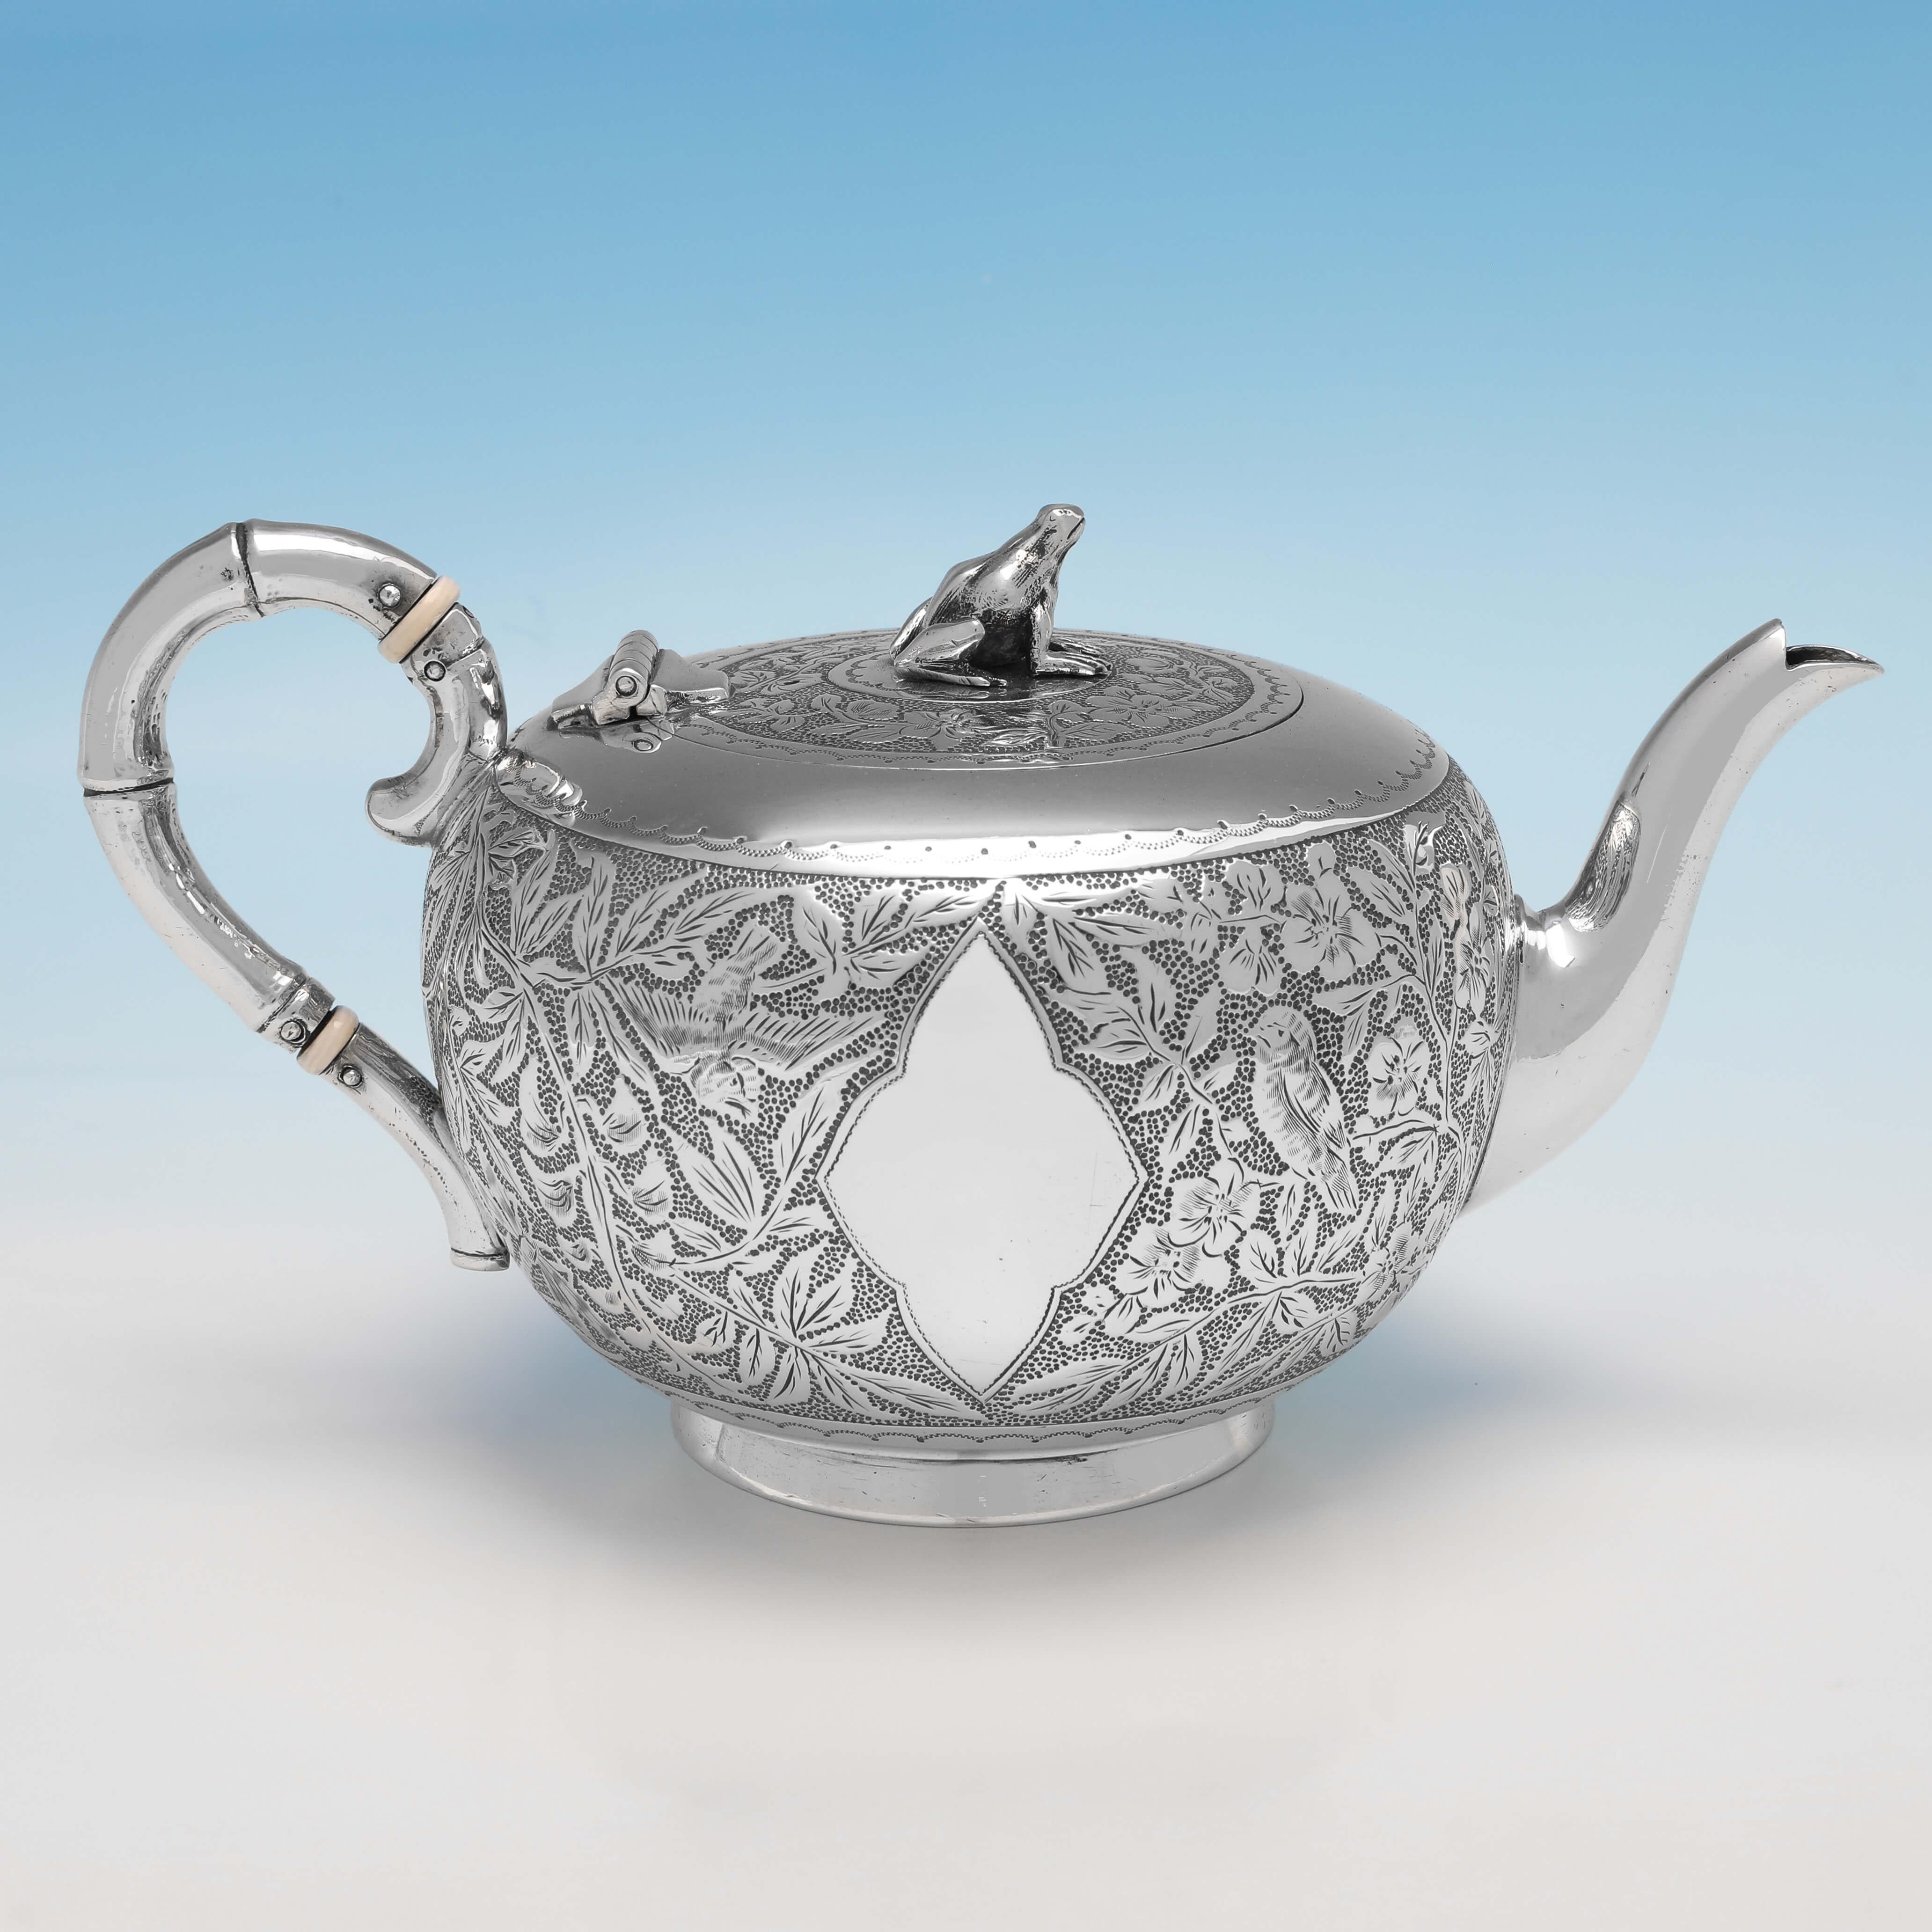 Hallmarked in London in 1890 by Goldsmiths Alliance, this attractive, antique Sterling Silver teapot, is in the Aesthetic taste, featuring chased and engraved decoration to the body, a bamboo designed handle, and a frog finial. The teapot measures